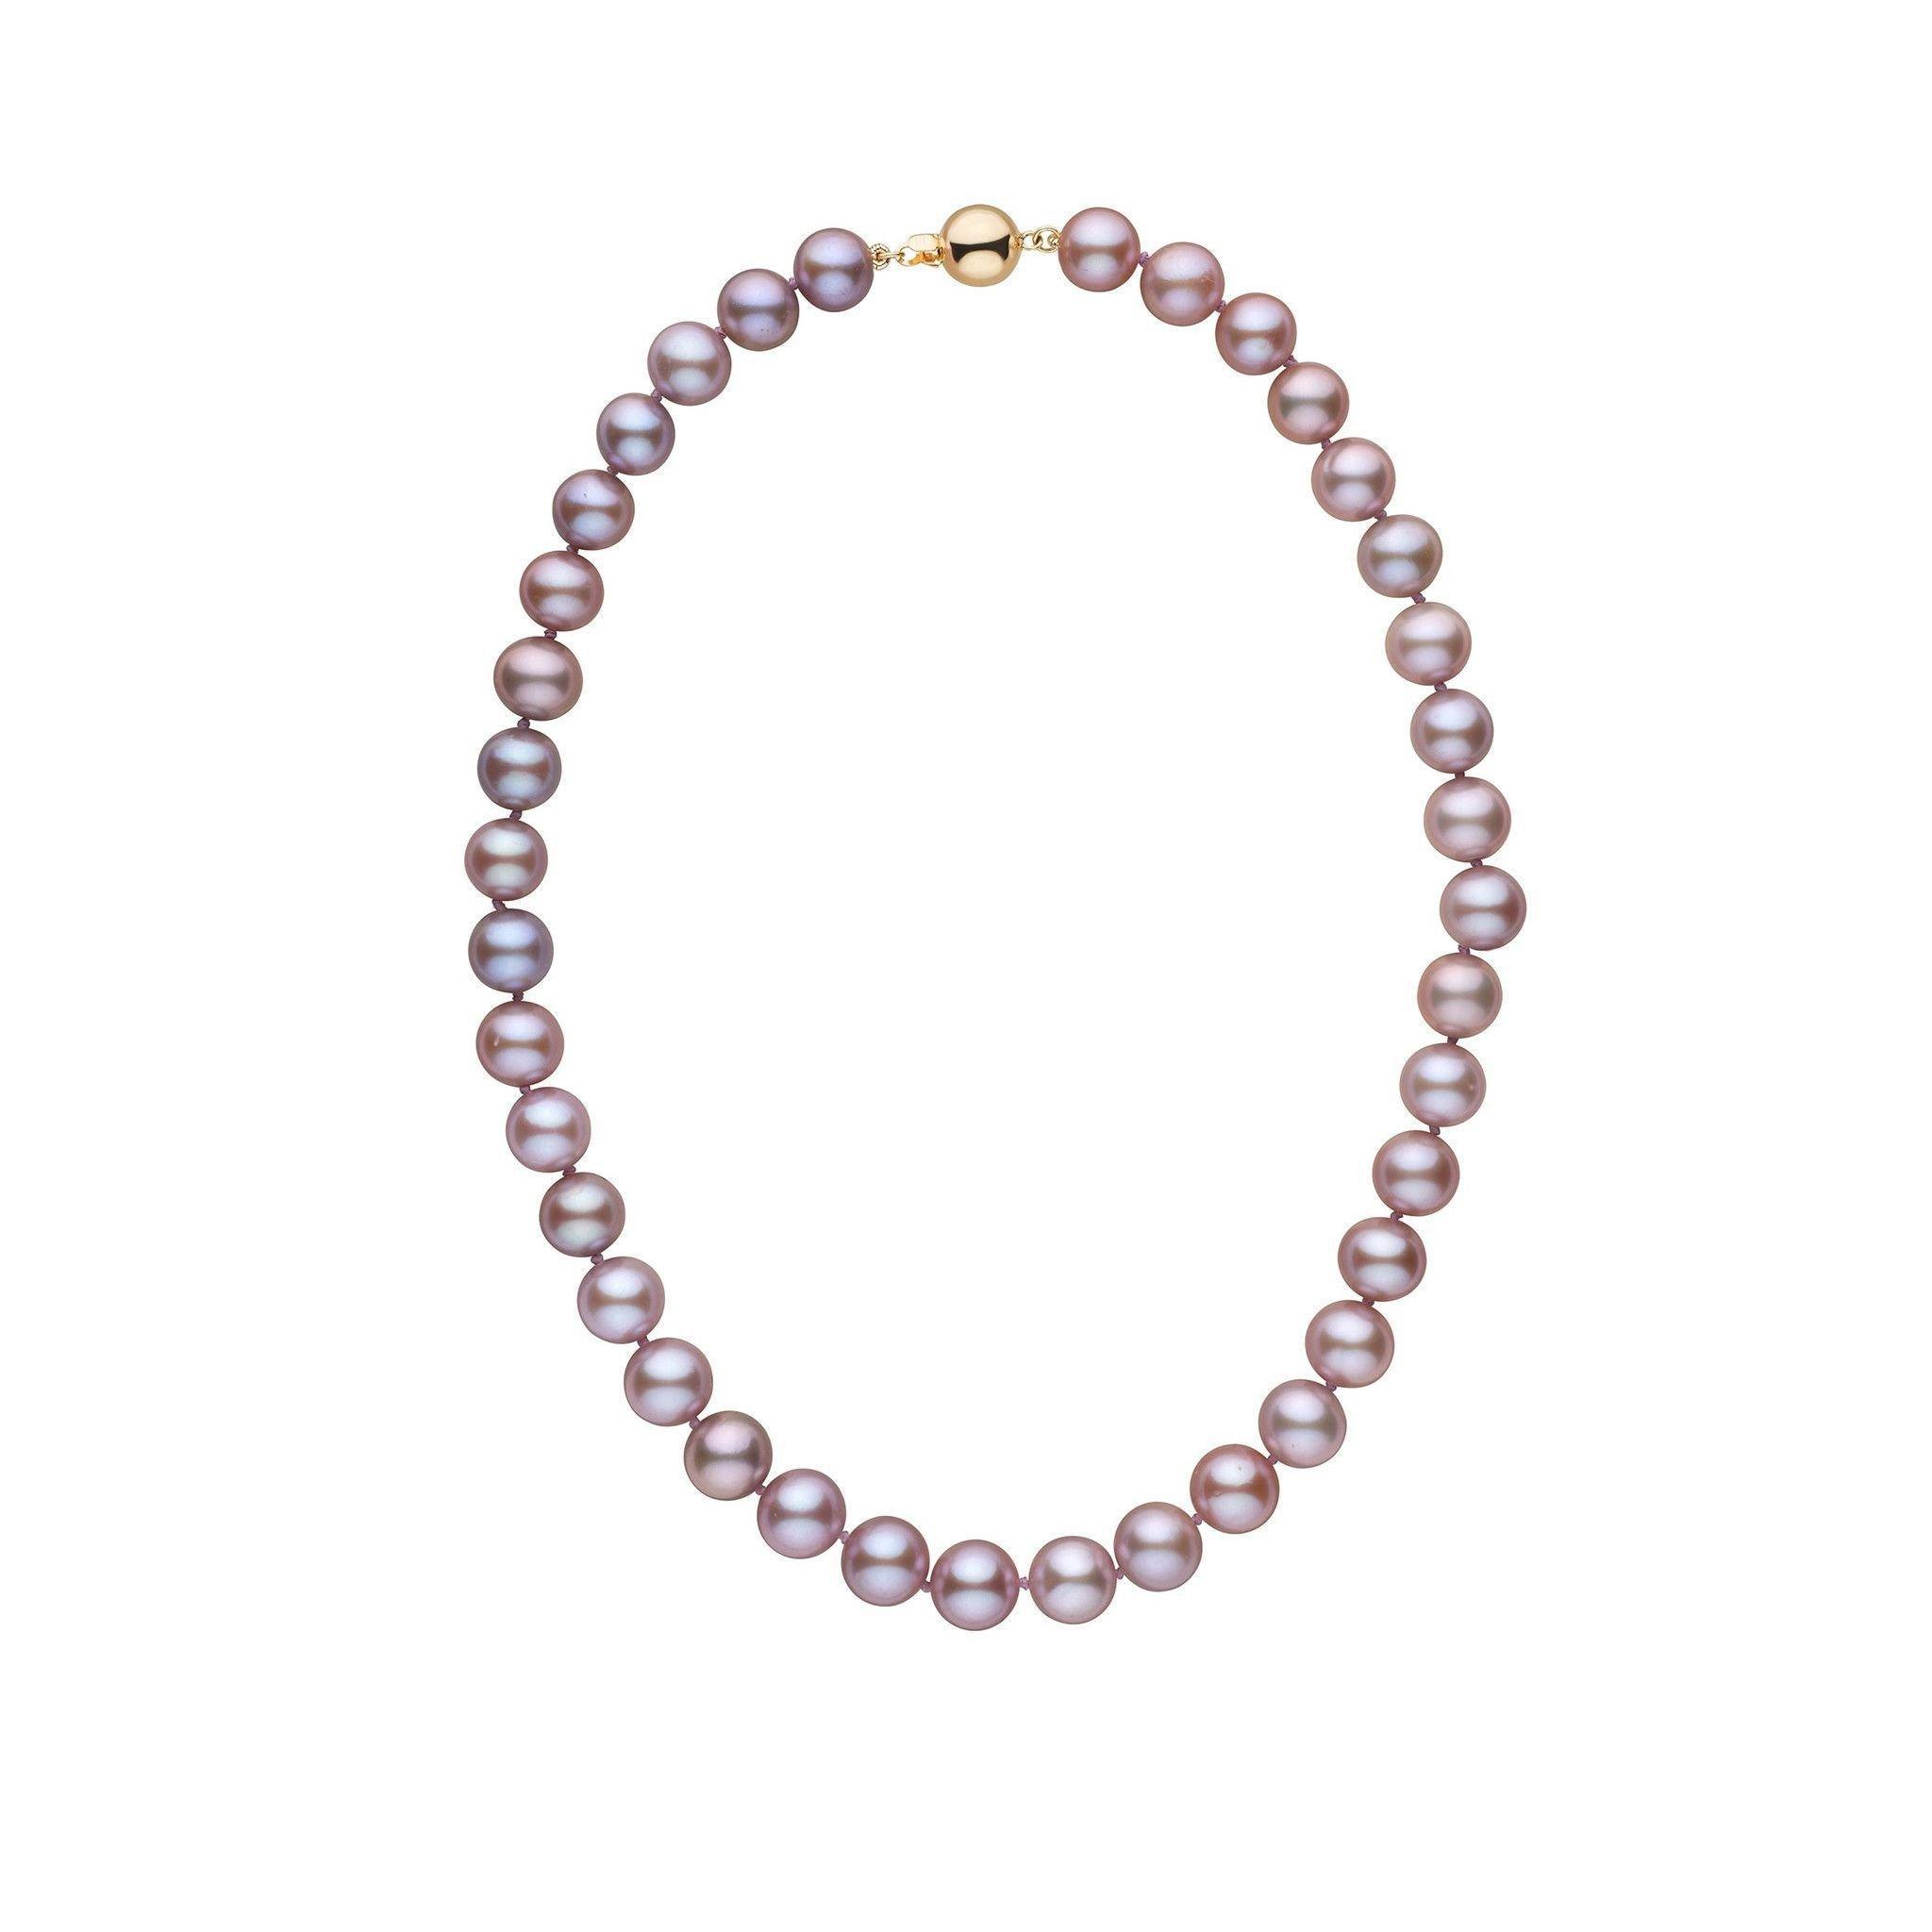 9.5-10.5 mm 16 Inch AA+ Lavender Freshwater Pearl Necklace